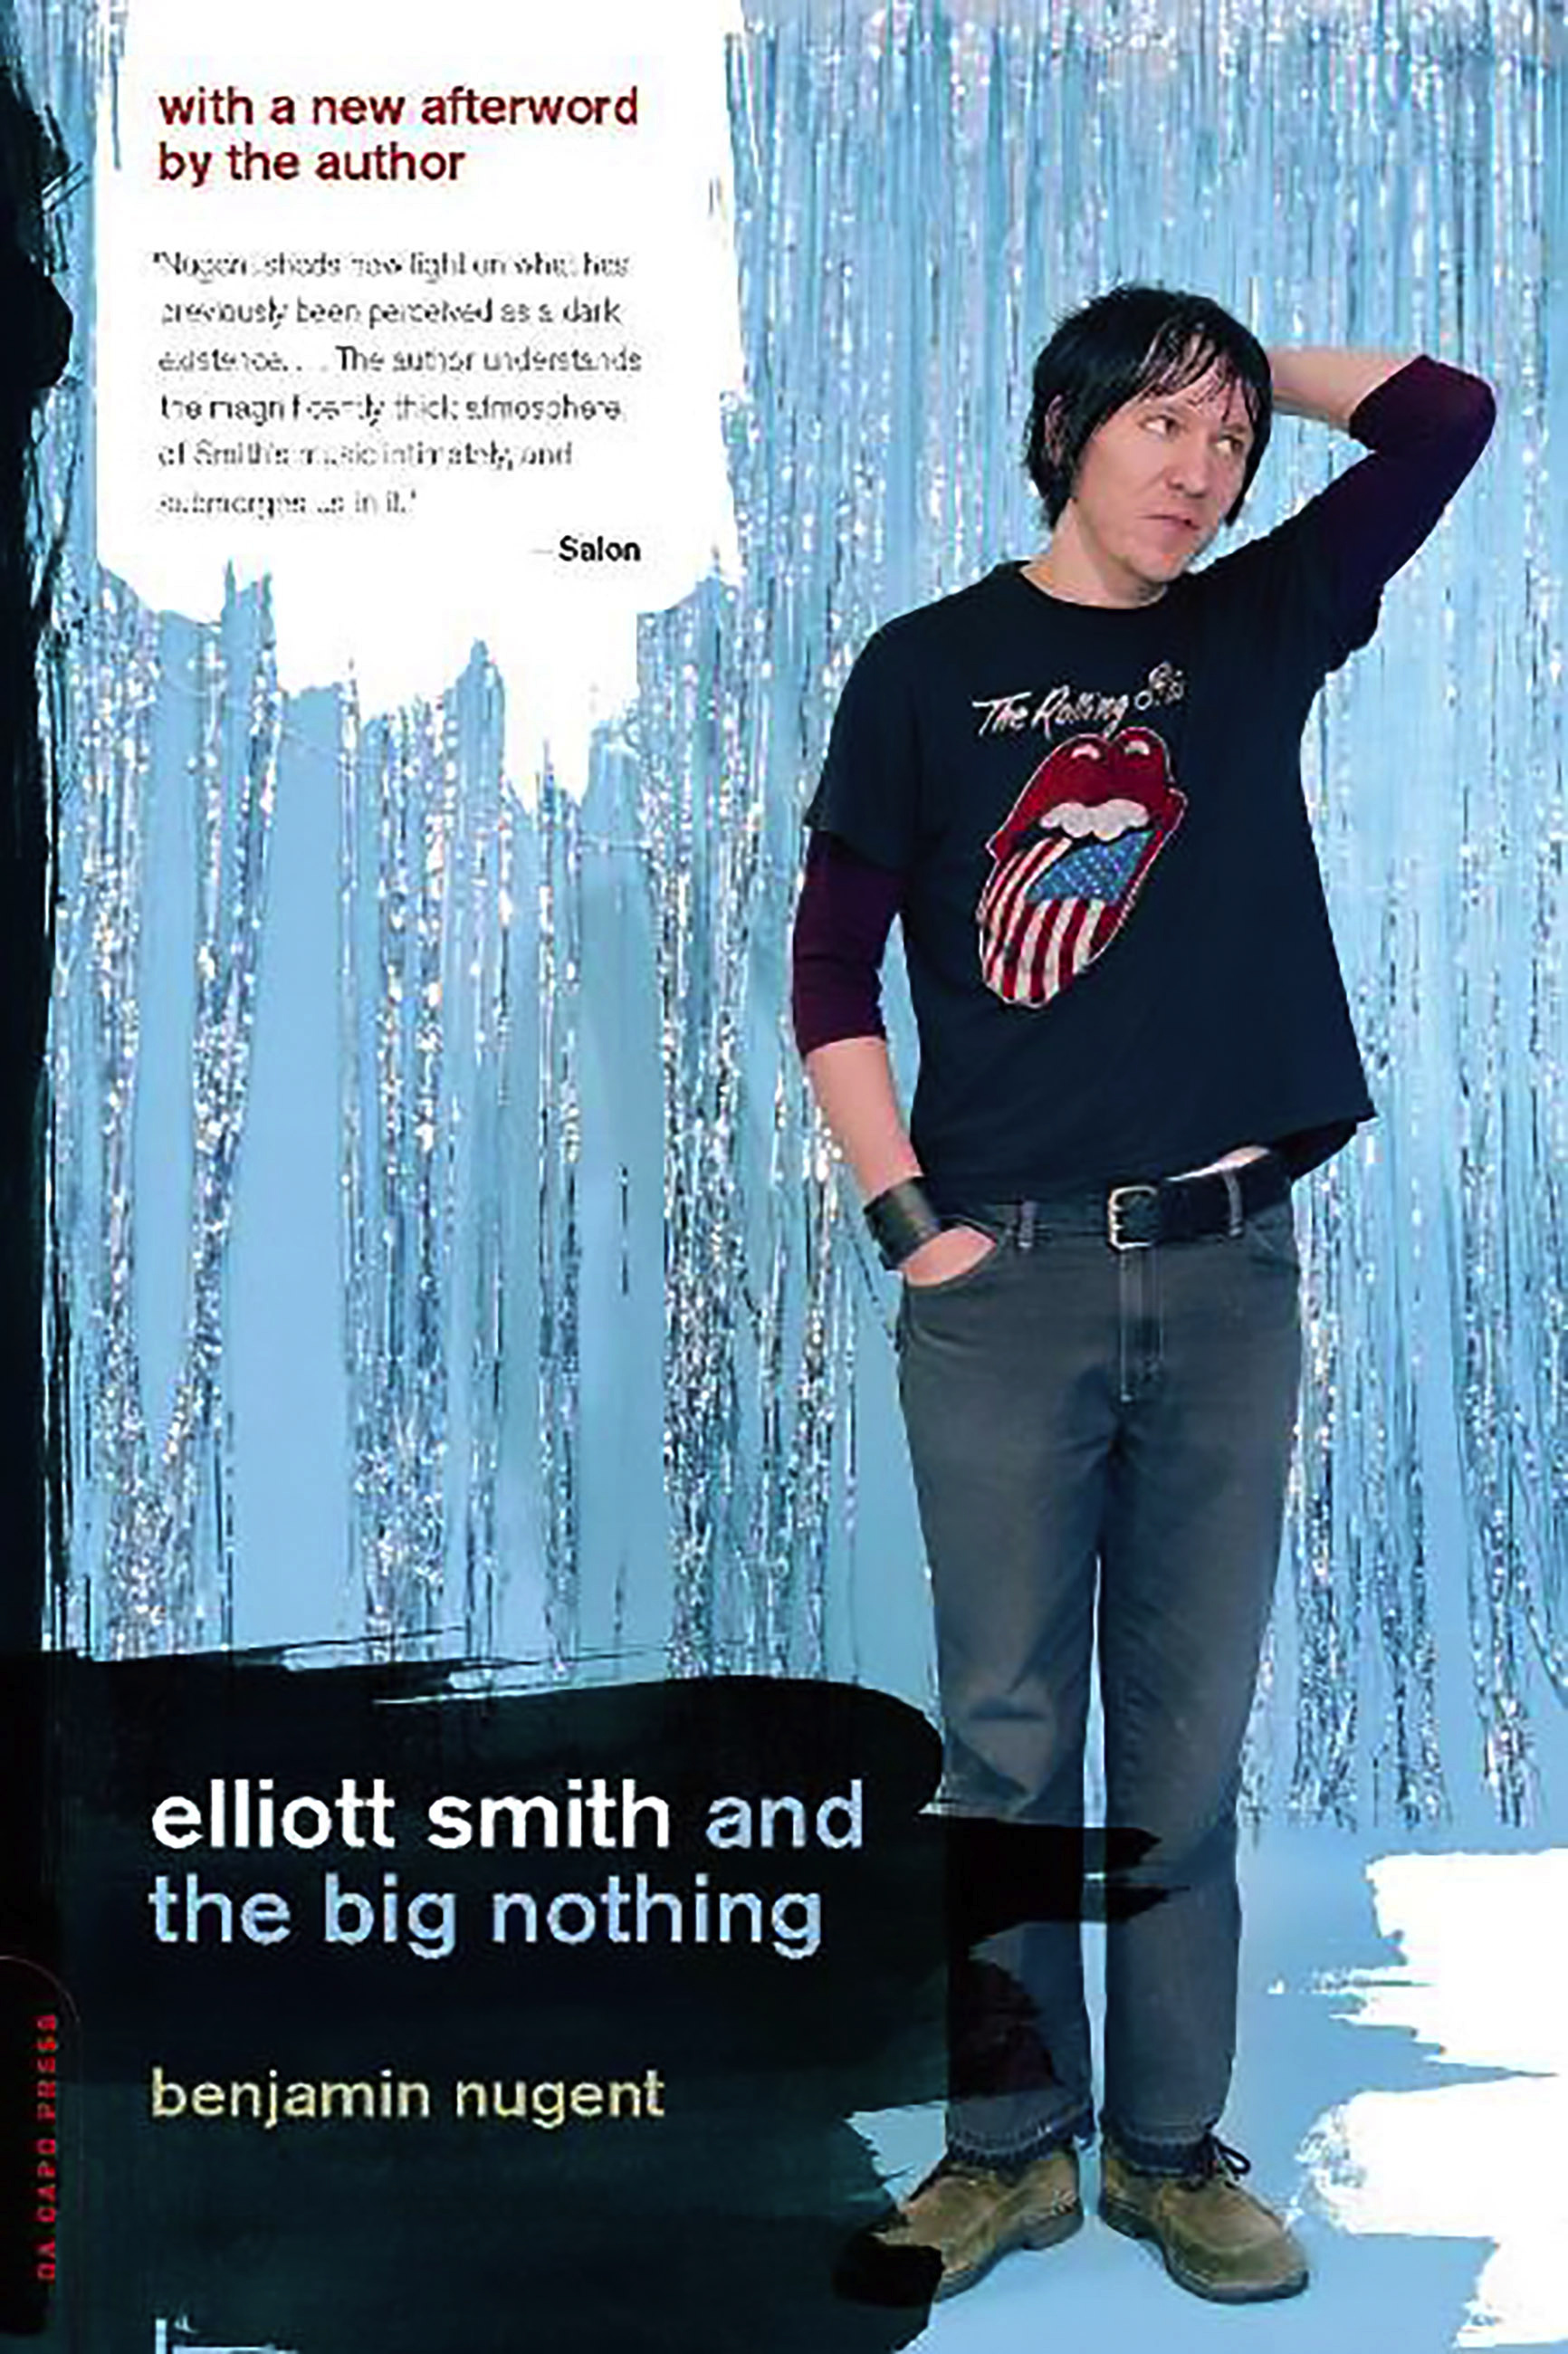 Elliott Smith and the Big Nothing by Benjamin Nugent | Da Capo Press